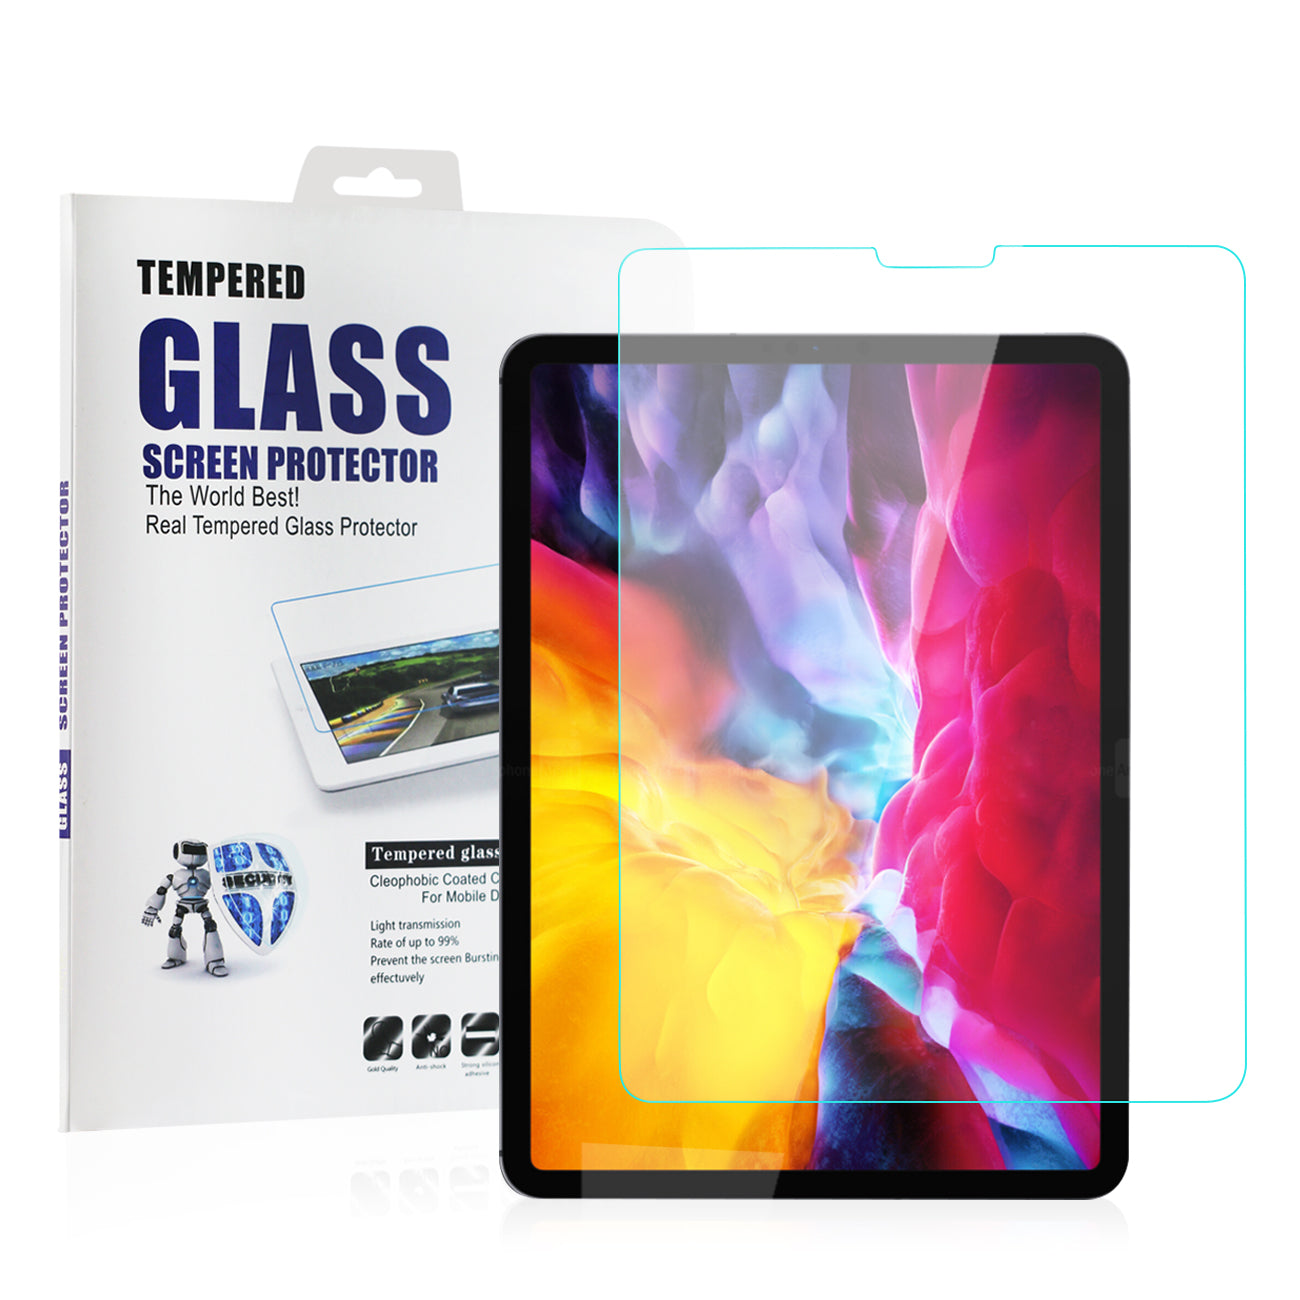 "Kaller Wireless iPad Screen Protector - Safeguard your iPad's screen with our premium quality screen protector, available at Kaller Wireless. Enjoy crystal-clear display and enhanced protection for your device."